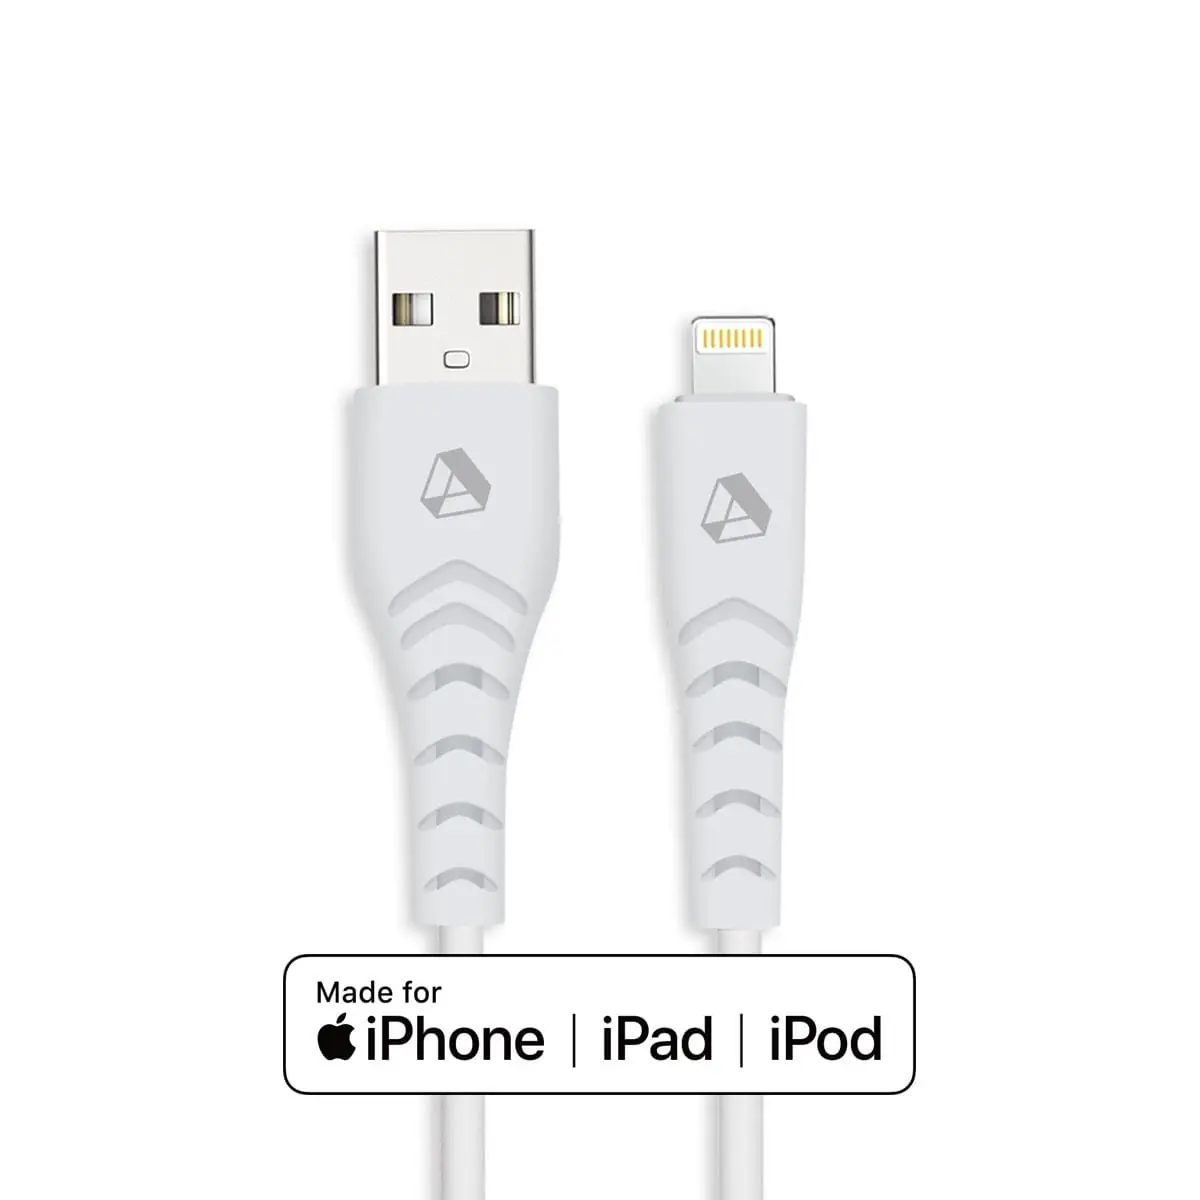 Reduce Your Carbon Footprint with the Eco-friendly Lightning to USB-A Cable - 1.5m